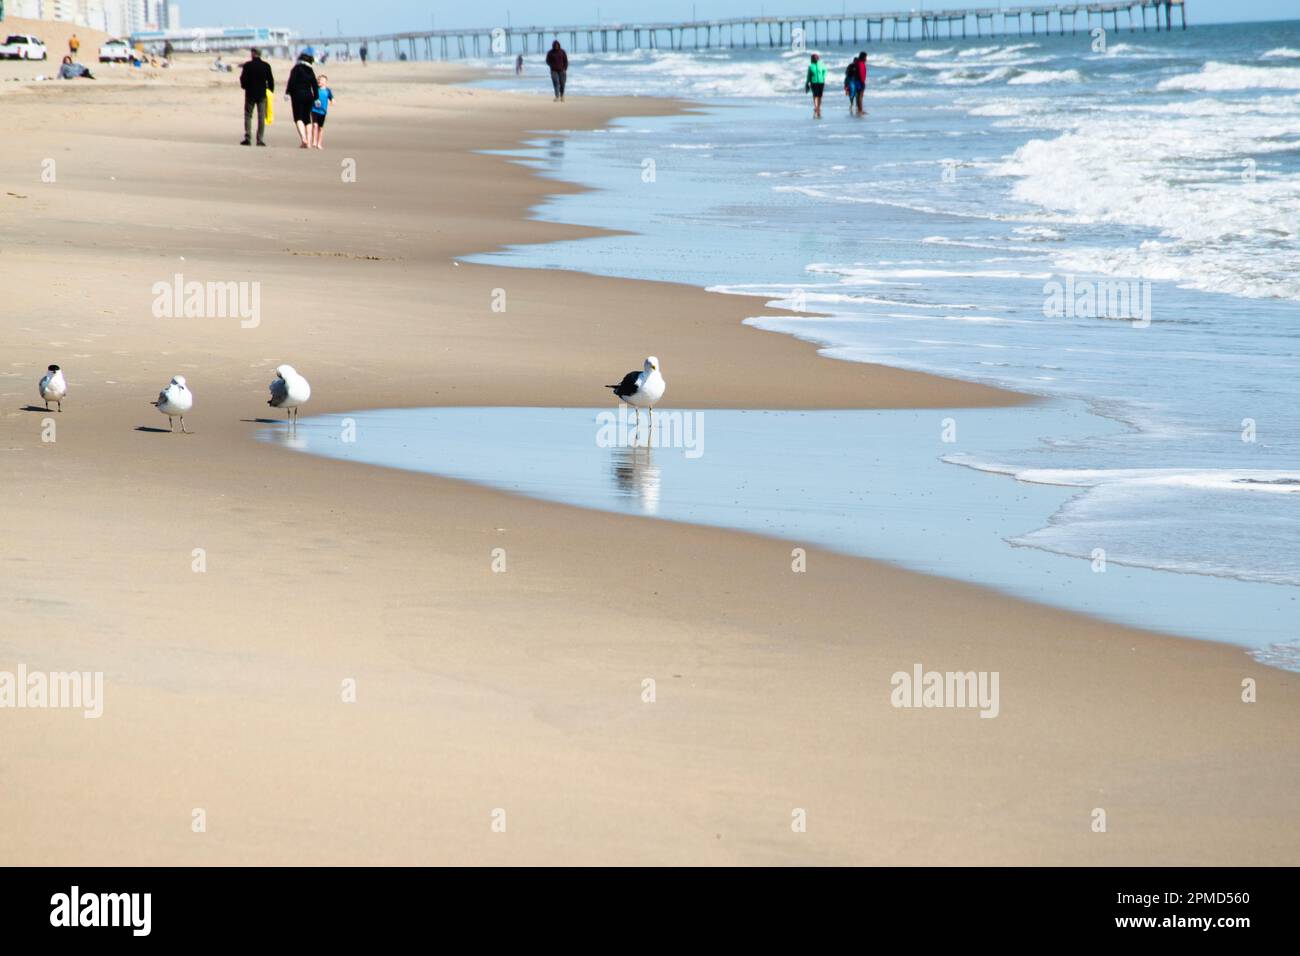 A group of Tern and Seagulls on the shoreline with people walking on the beach in the background. Stock Photo